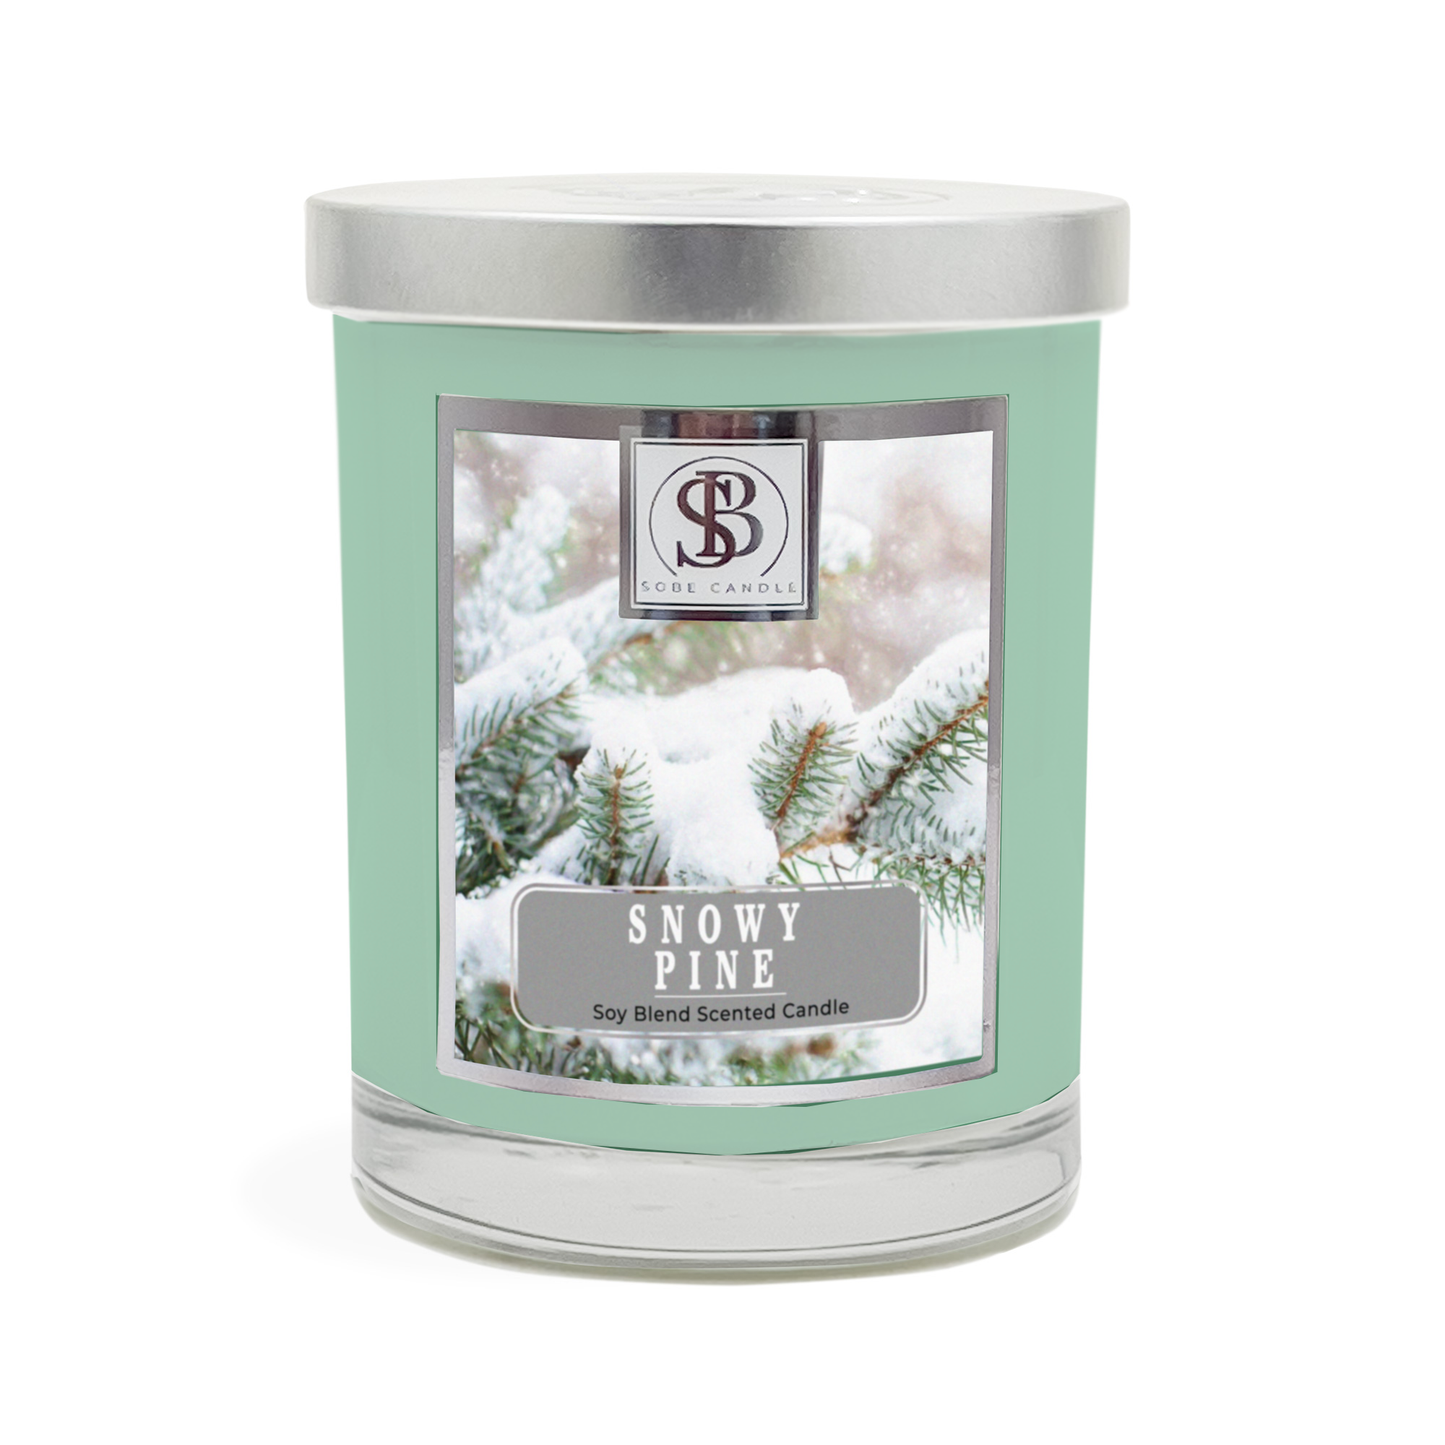 SNOWY PINE | Soy Scented Candle 11 oz